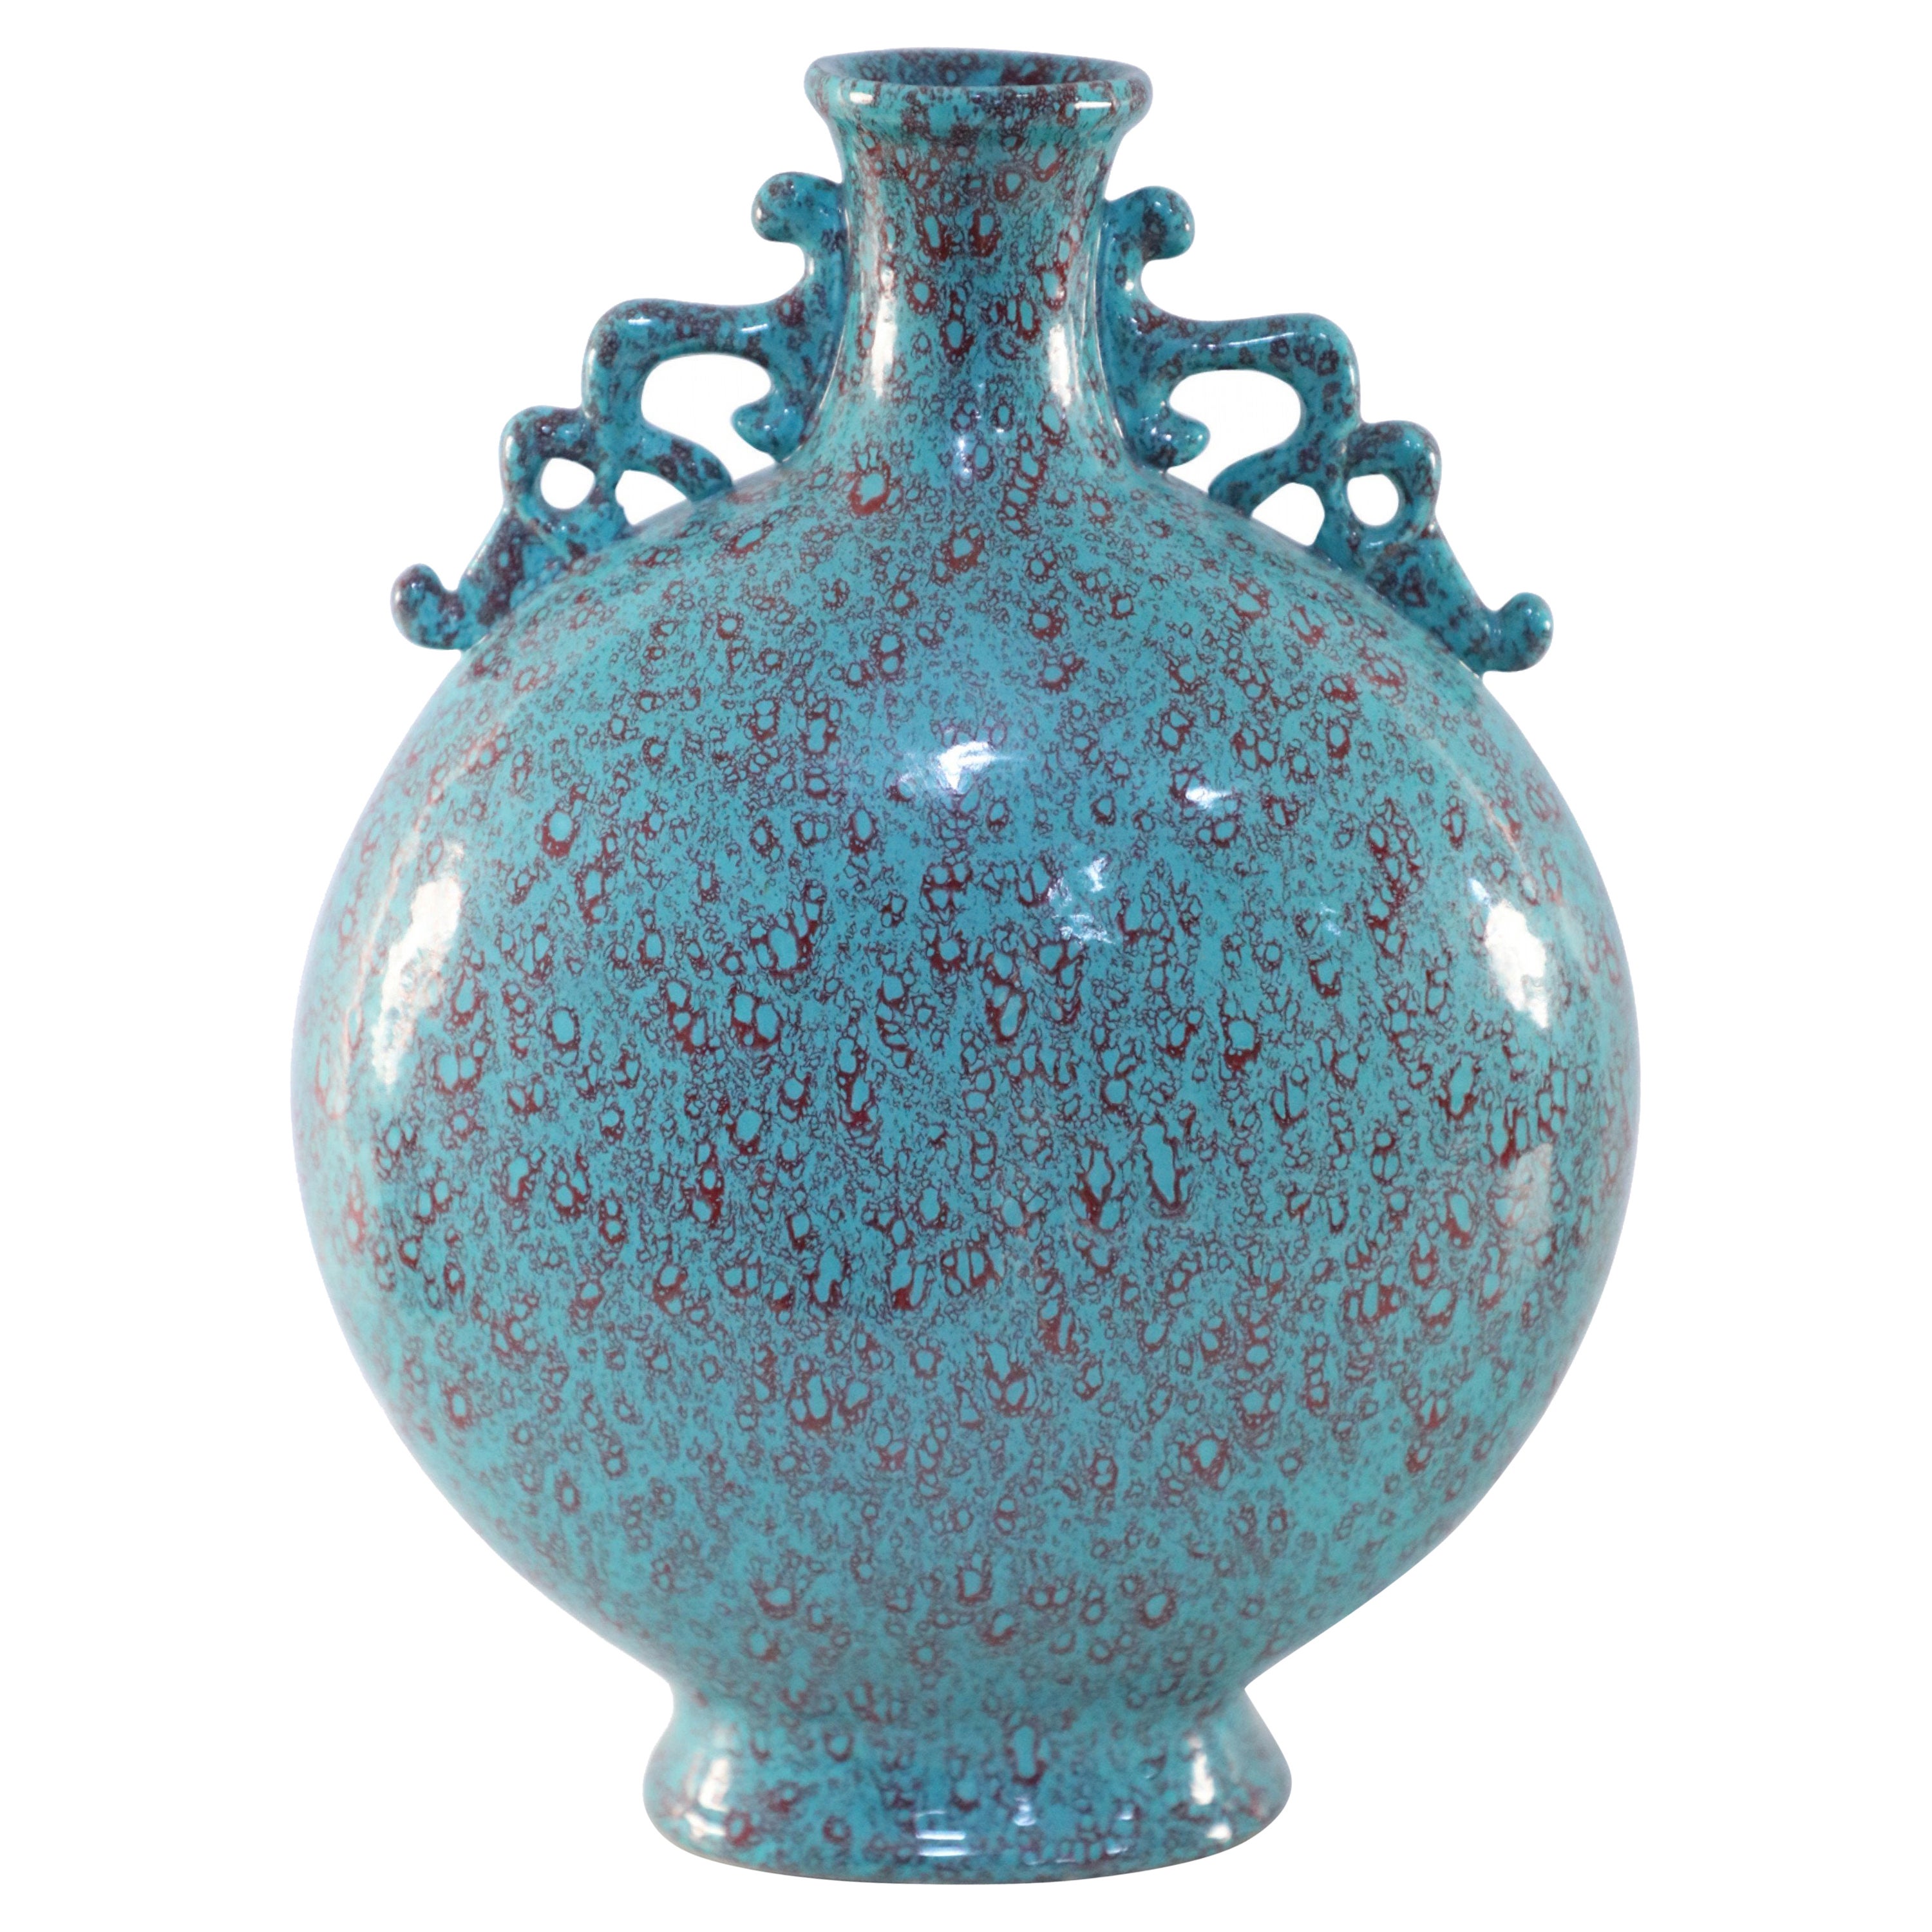 Chinese Teal and Red Crackle Porcelain Moon Flask Vase